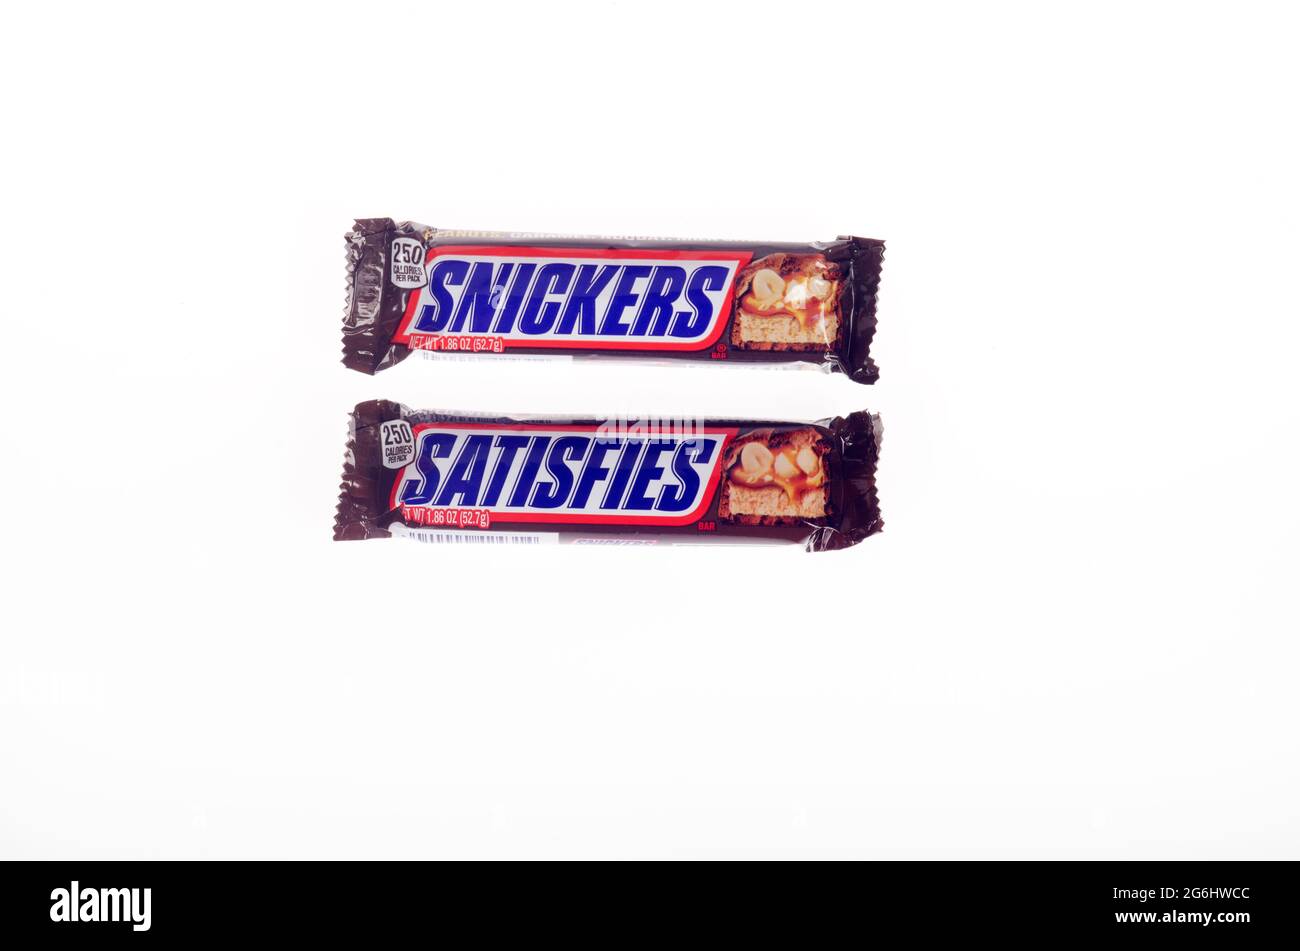 Snickers Satisfies Candy Bars Stock Photo